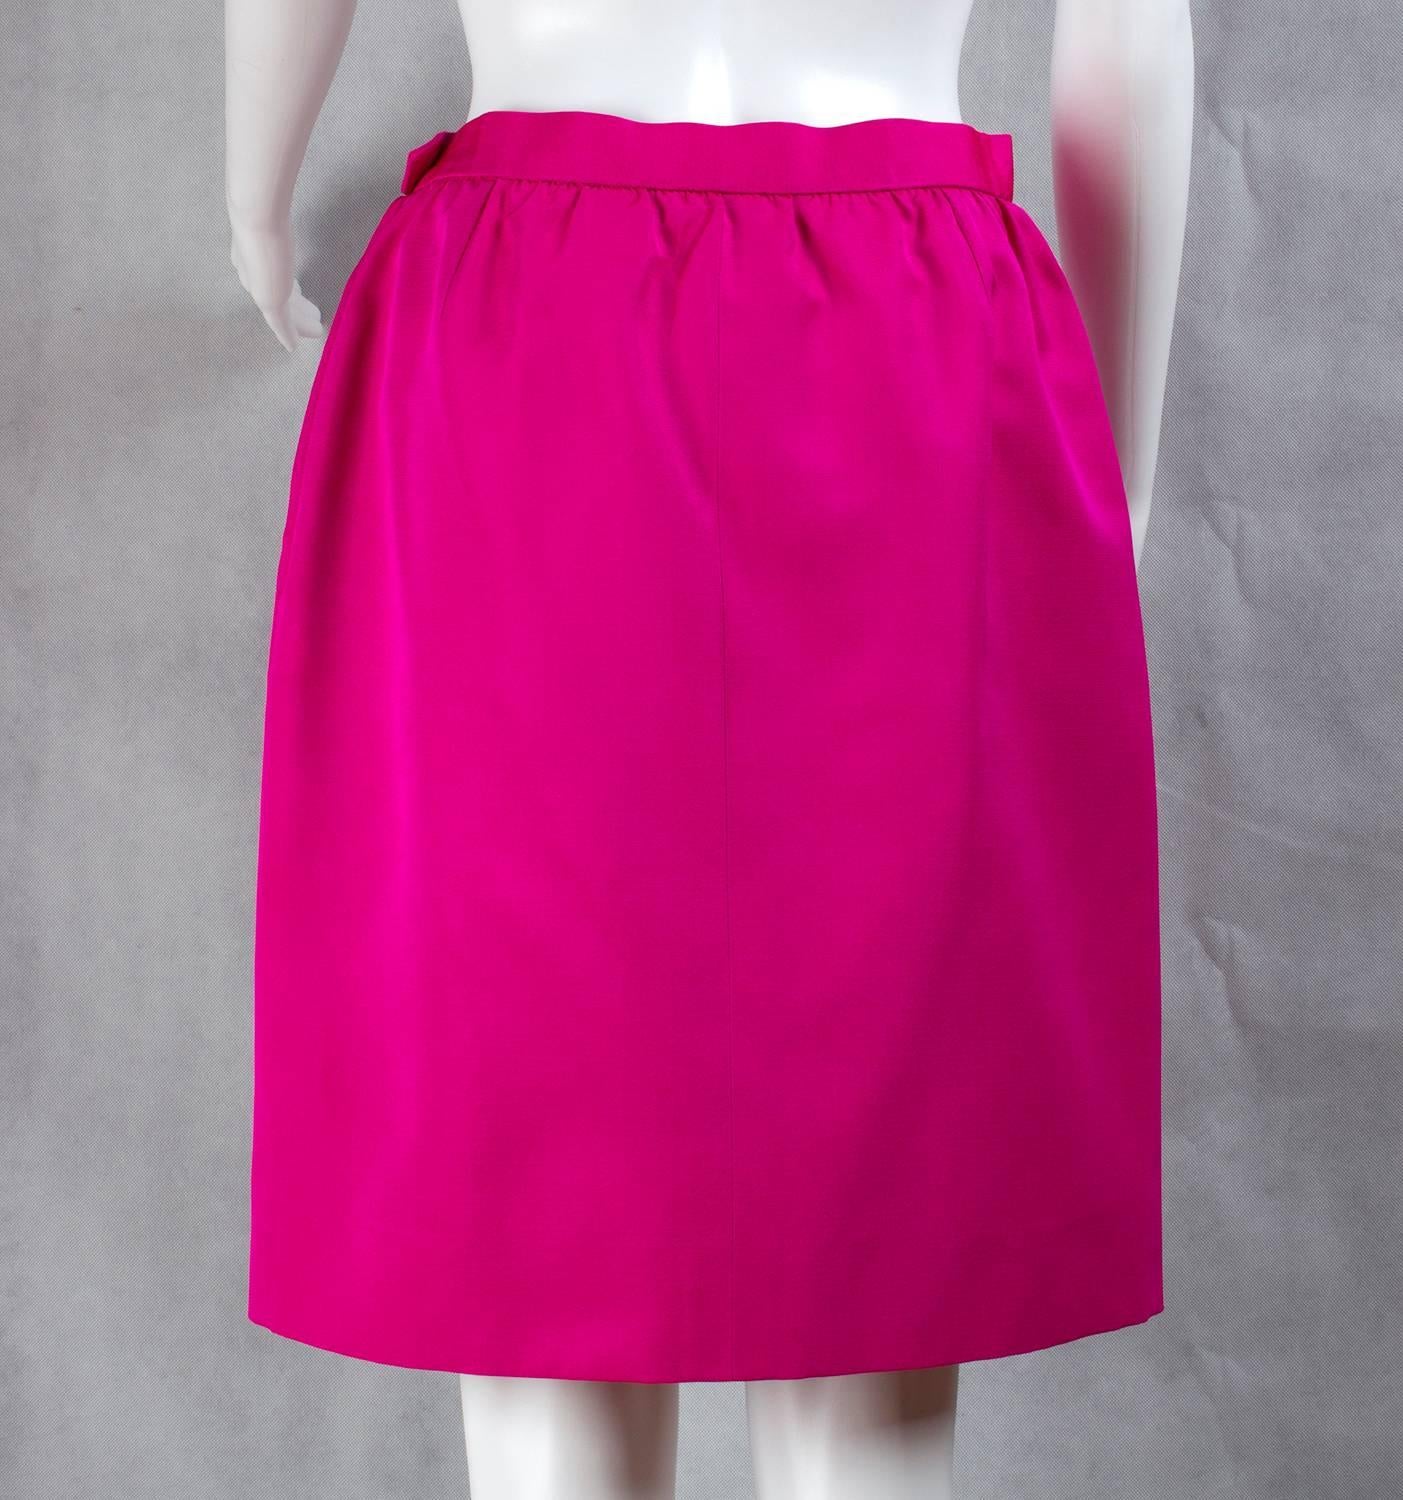 Beautiful pink silk skirt Yves Saint Laurent, 1990's
Two pockets

Brand: Yves Saint Laurent

Size : 42 eu, 12 UK, 8 US

Material: silk

Condition: good condition, Some light signs of wear, one stain in the front part at the bottom

Approx.